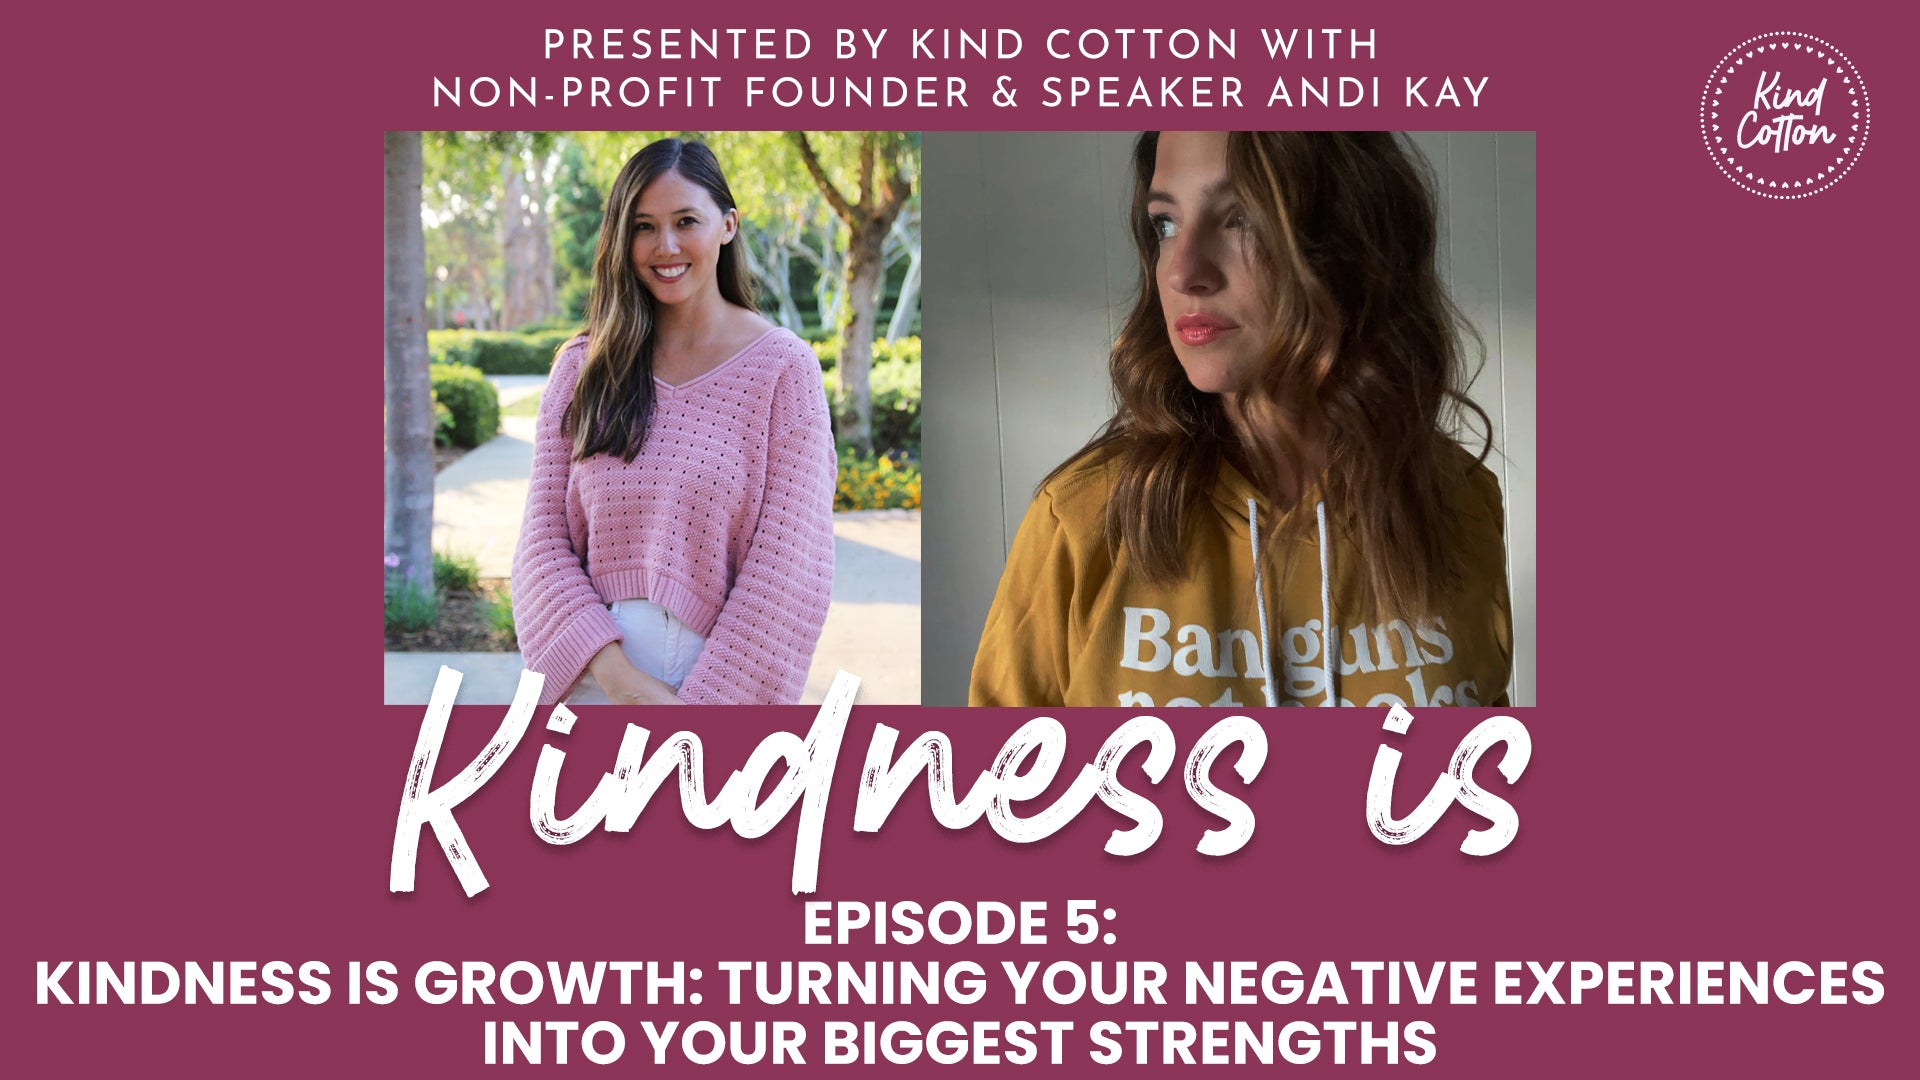 Kindness Is Growth: Turning negative experiences into your biggest strengths with Bloom Foundation founder Andi Kay